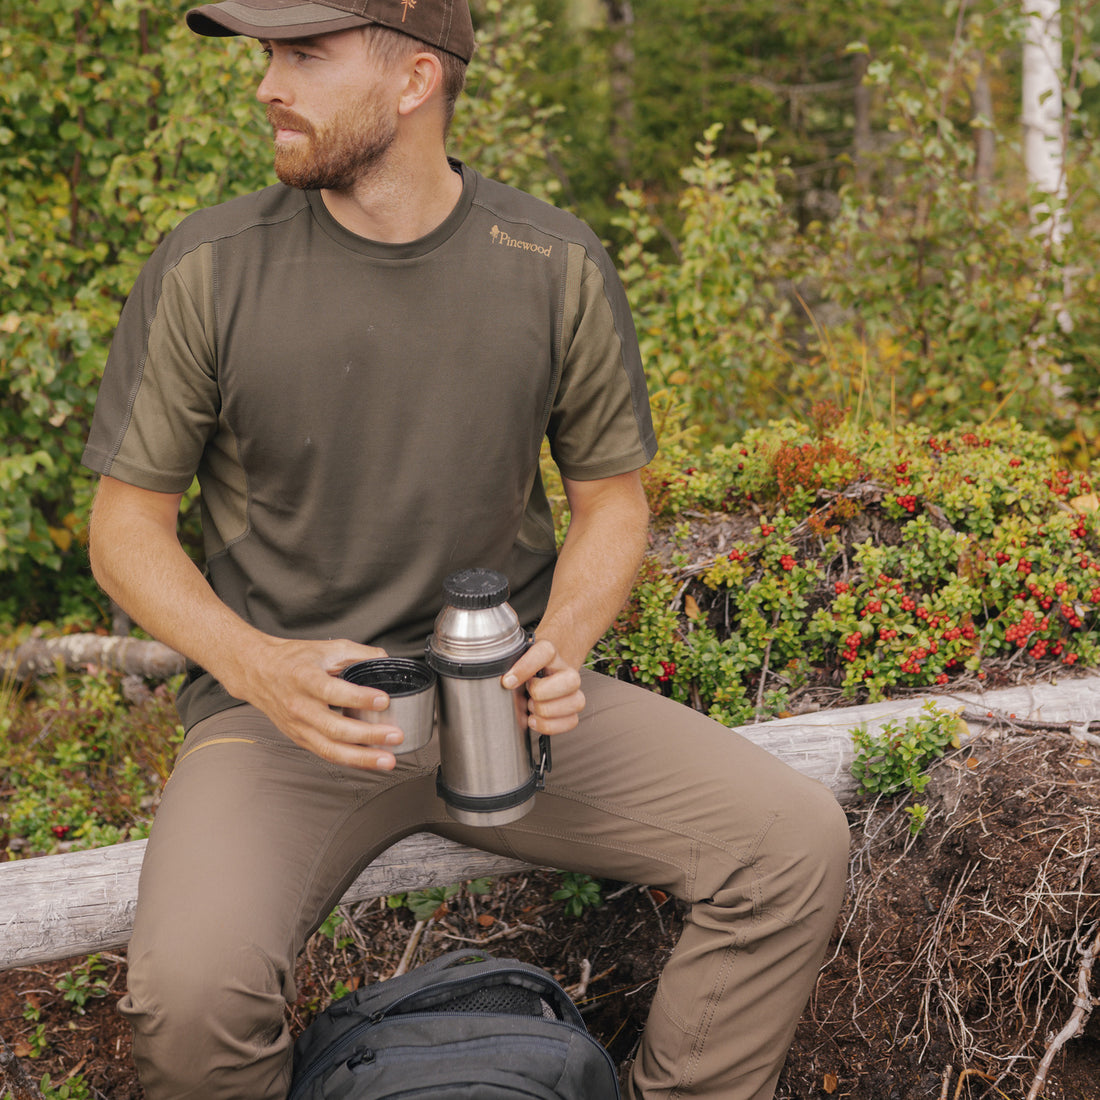 – Forest New Hiking Clothing Shirts